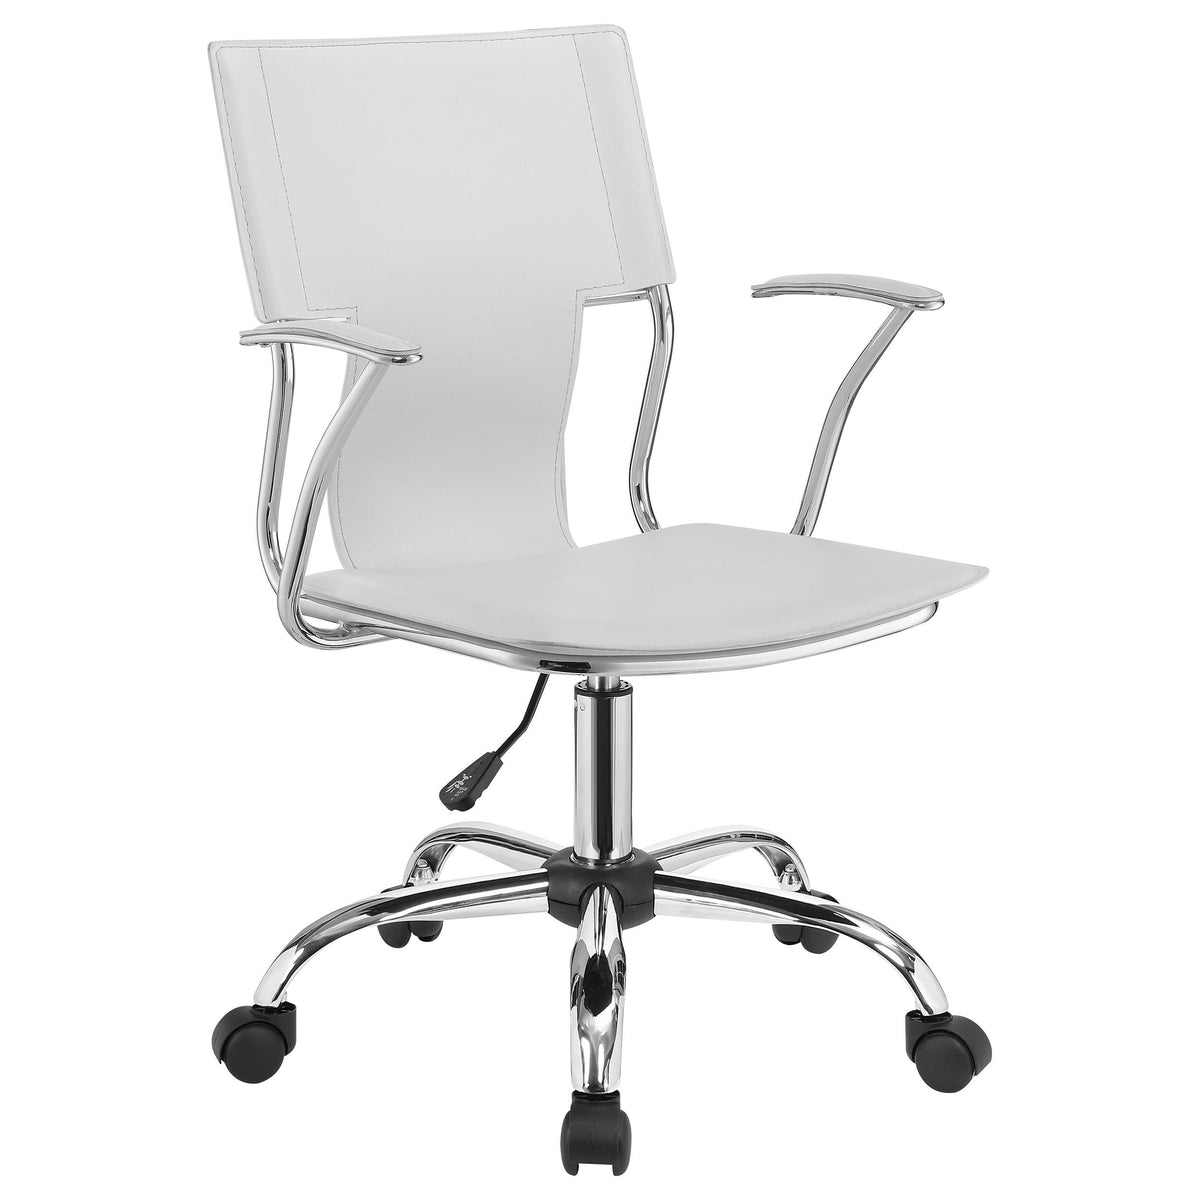 Himari Adjustable Height Office Chair White and Chrome  Half Price Furniture